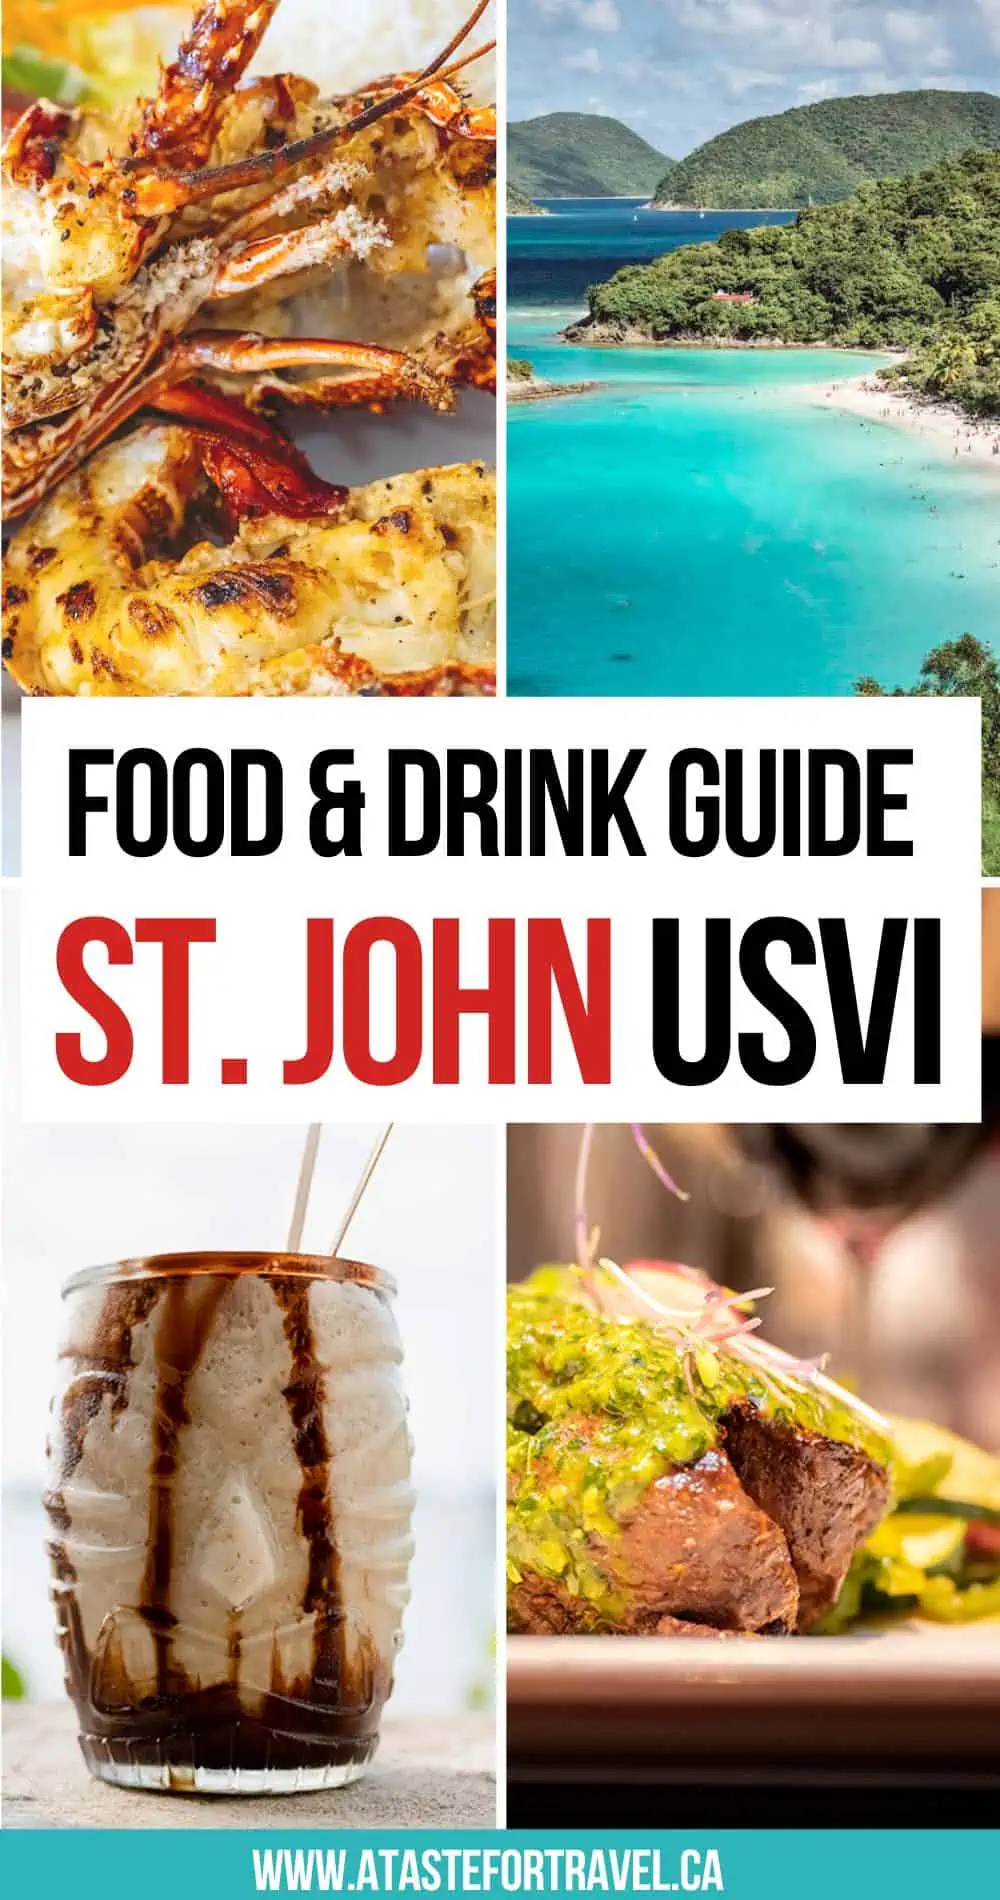 Collage of St. John food and scenery in USVI for Pinterest.